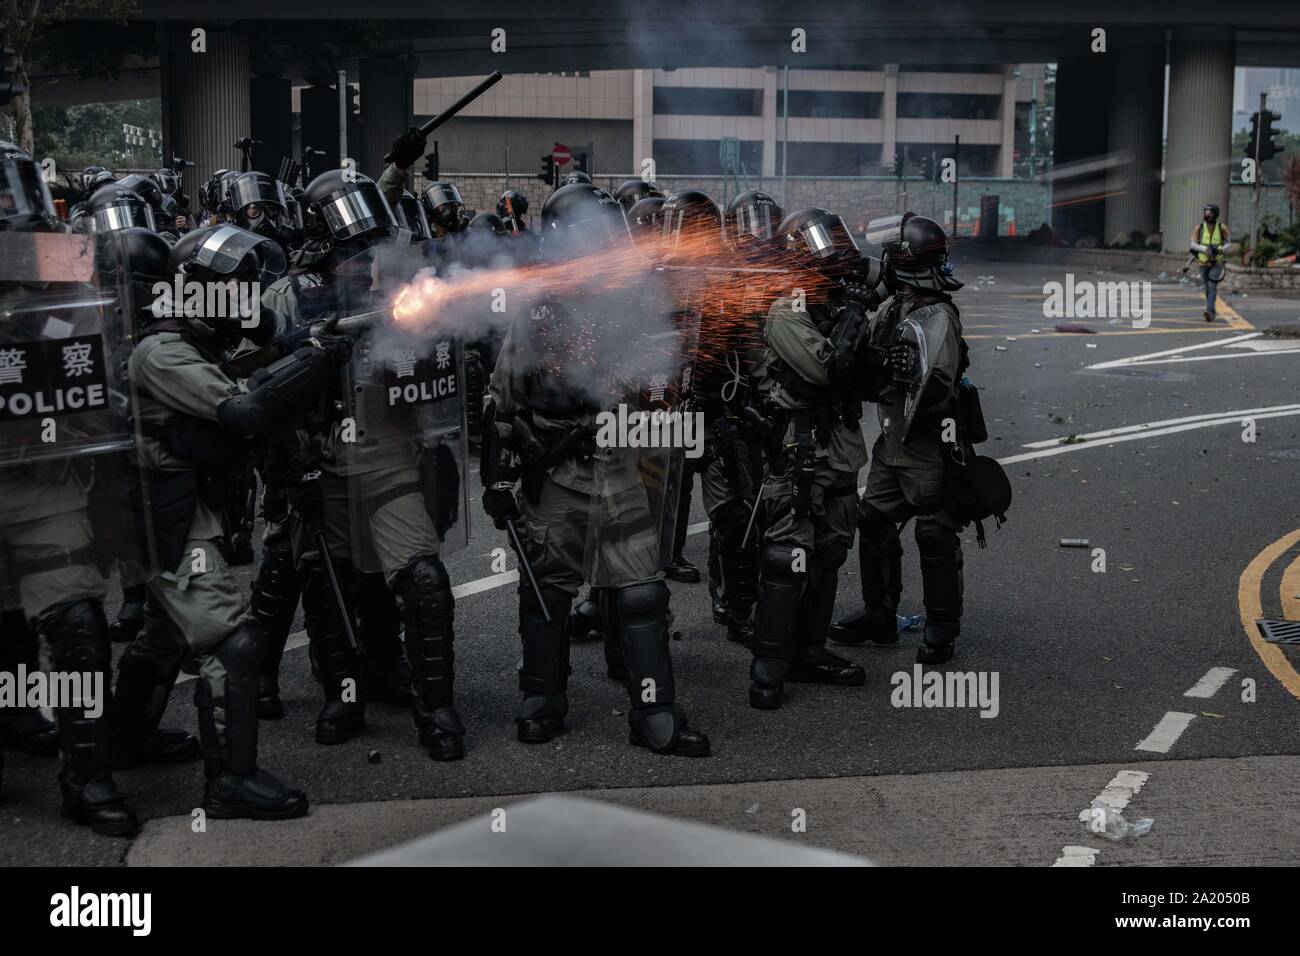 Hong Kong, China. 29th Sep, 2019. Riot police fire teargas and rubber bullets against protesters during the demonstration.Protesters attend a Global Anti-Totalitarianism March in Hong Kong - Demonstrations continue in Hong Kong marking one of the worst days of violence in 4 months of unrest. Credit: SOPA Images Limited/Alamy Live News Stock Photo